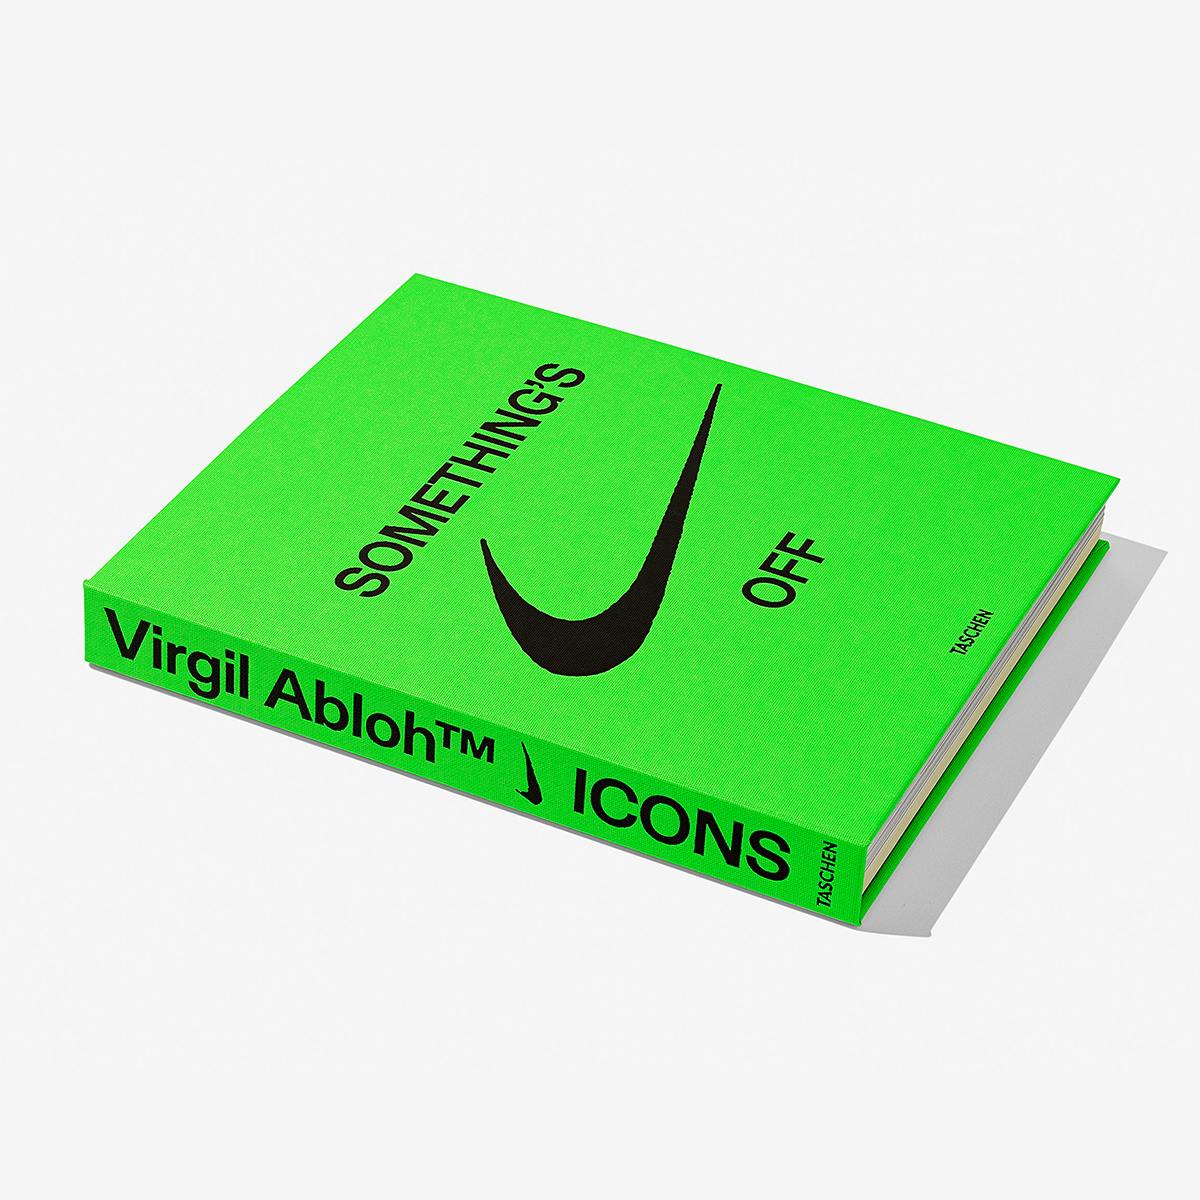 A new book is documenting Virgil Abloh’s partnership with Nike | Flipboard